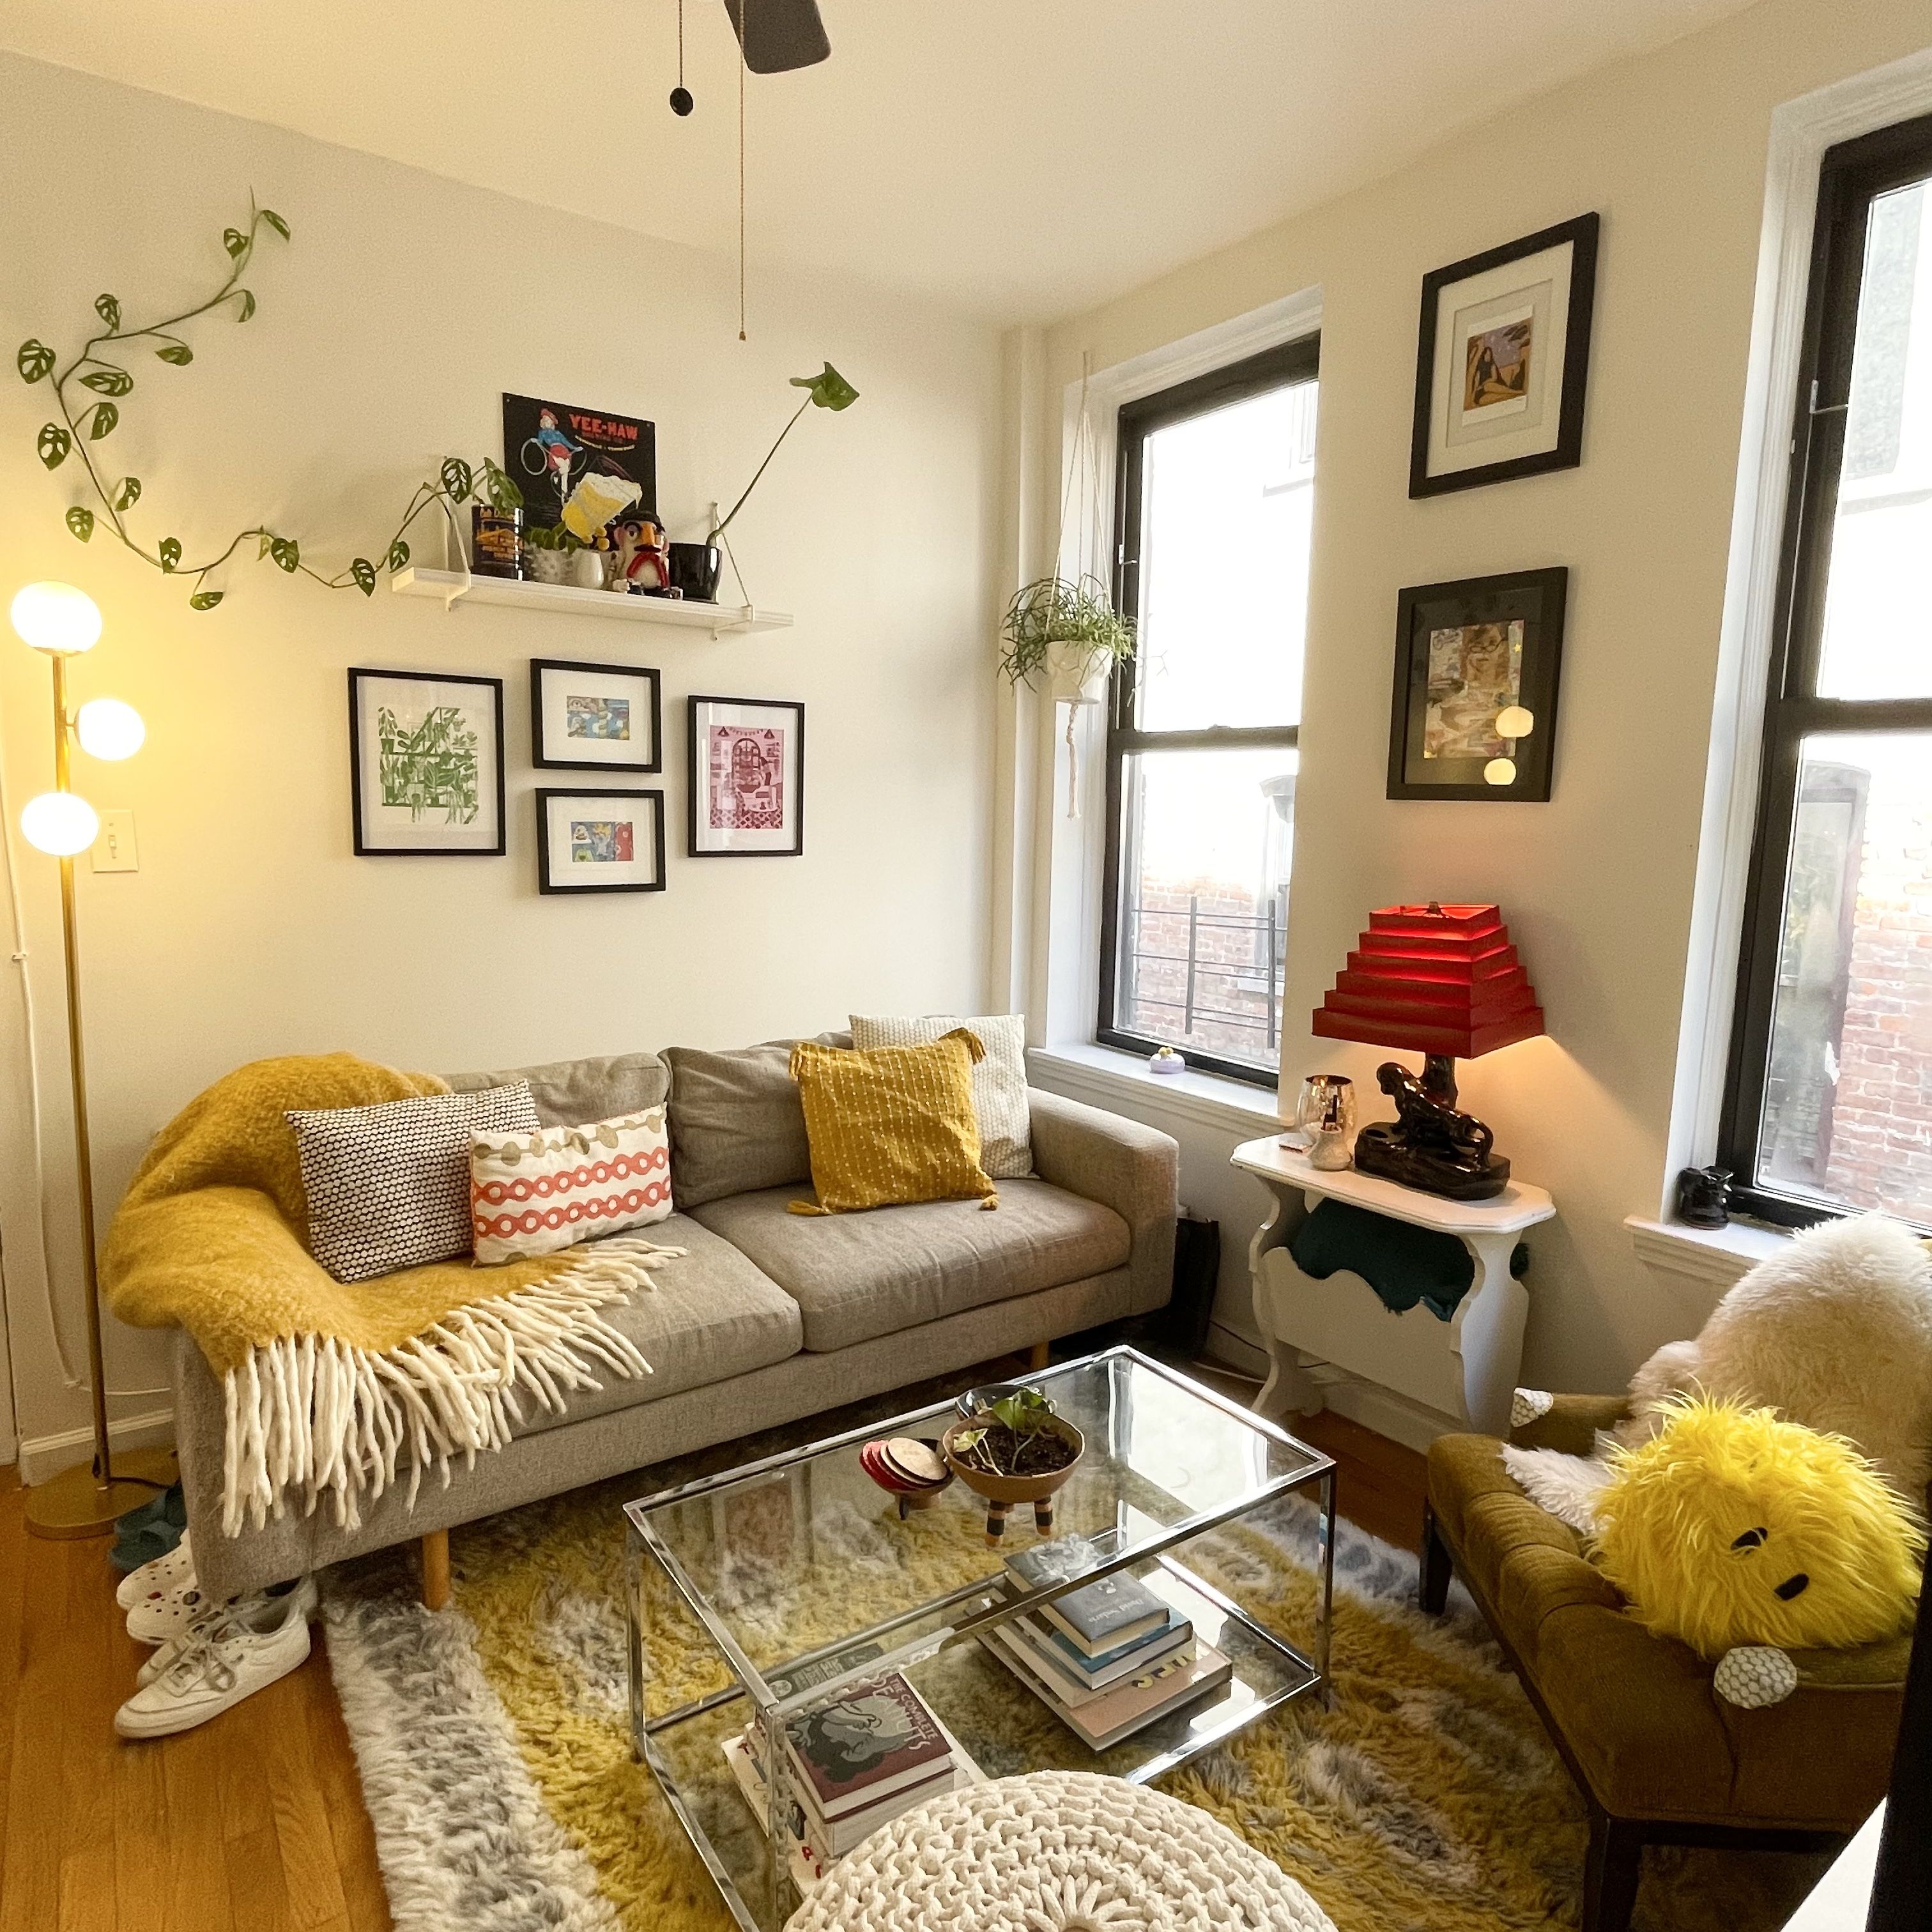 A 550-Square-Foot Brooklyn Rental Is Filled with Furniture That's Been Given a Second Life